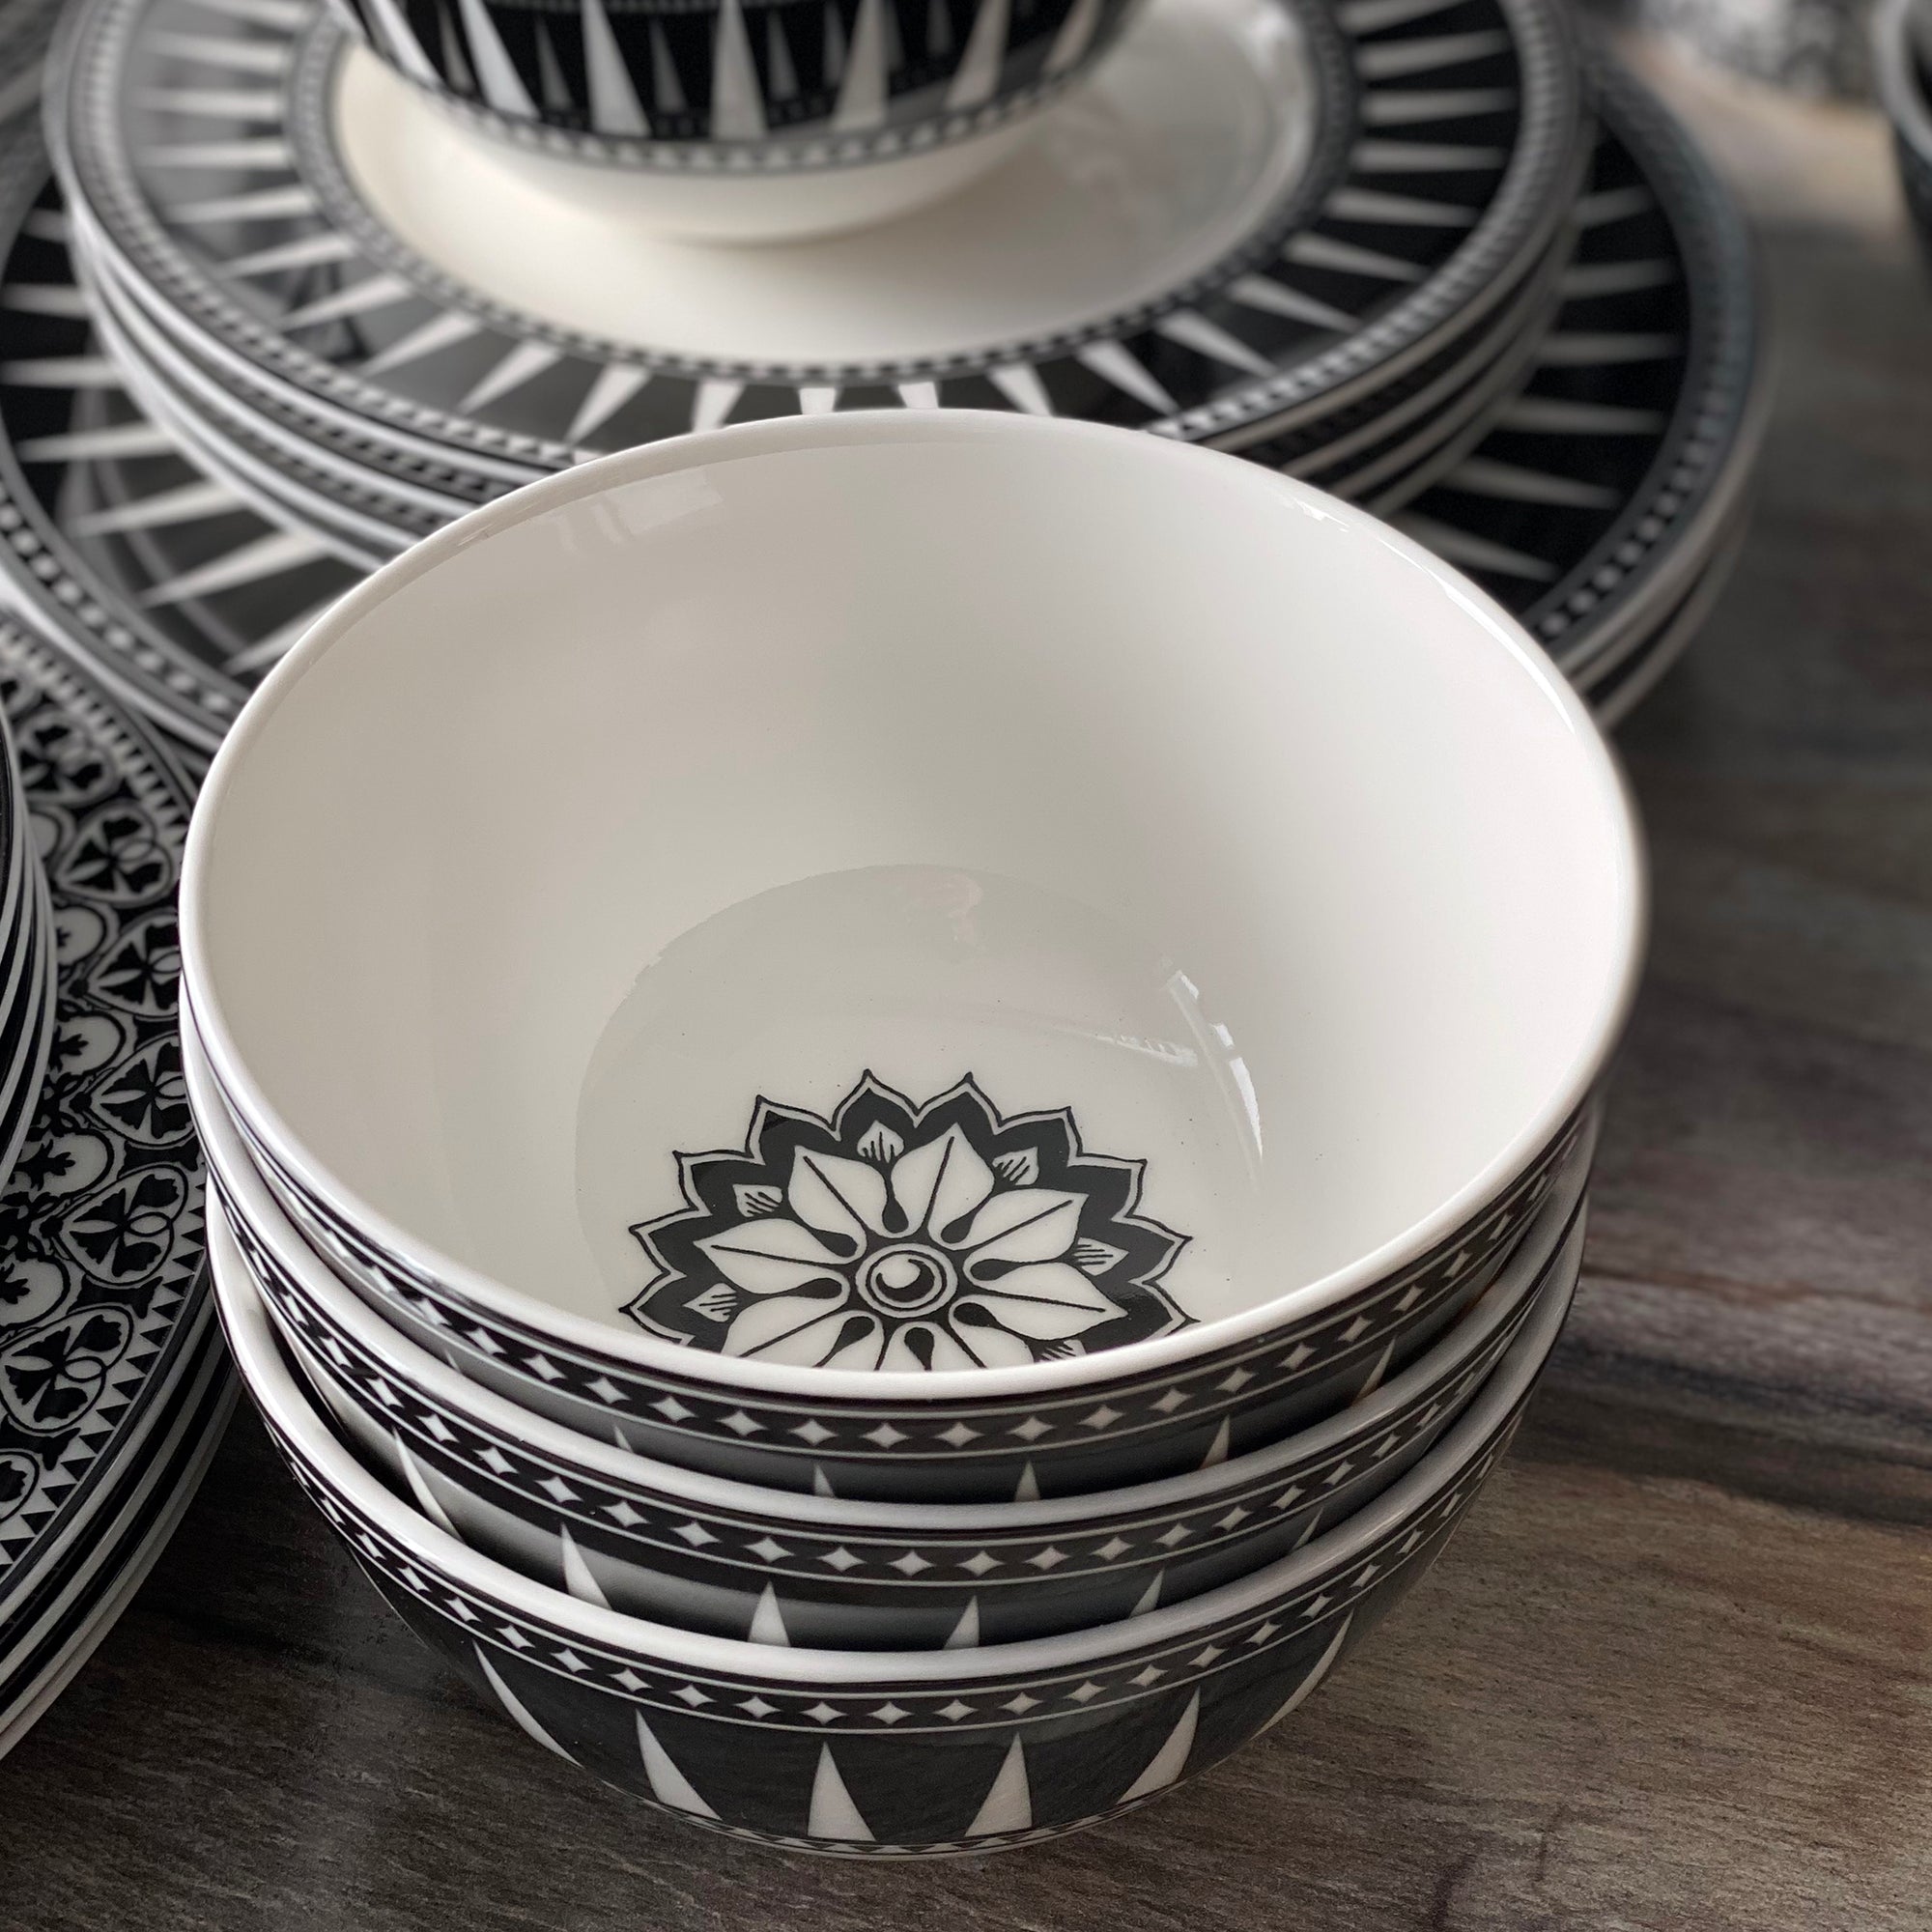 A white high-fired porcelain bowl with a black geometric pattern around the exterior, reminiscent of Art Deco inspired ceramics, the Marrakech Cereal Bowl by Caskata Artisanal Home.